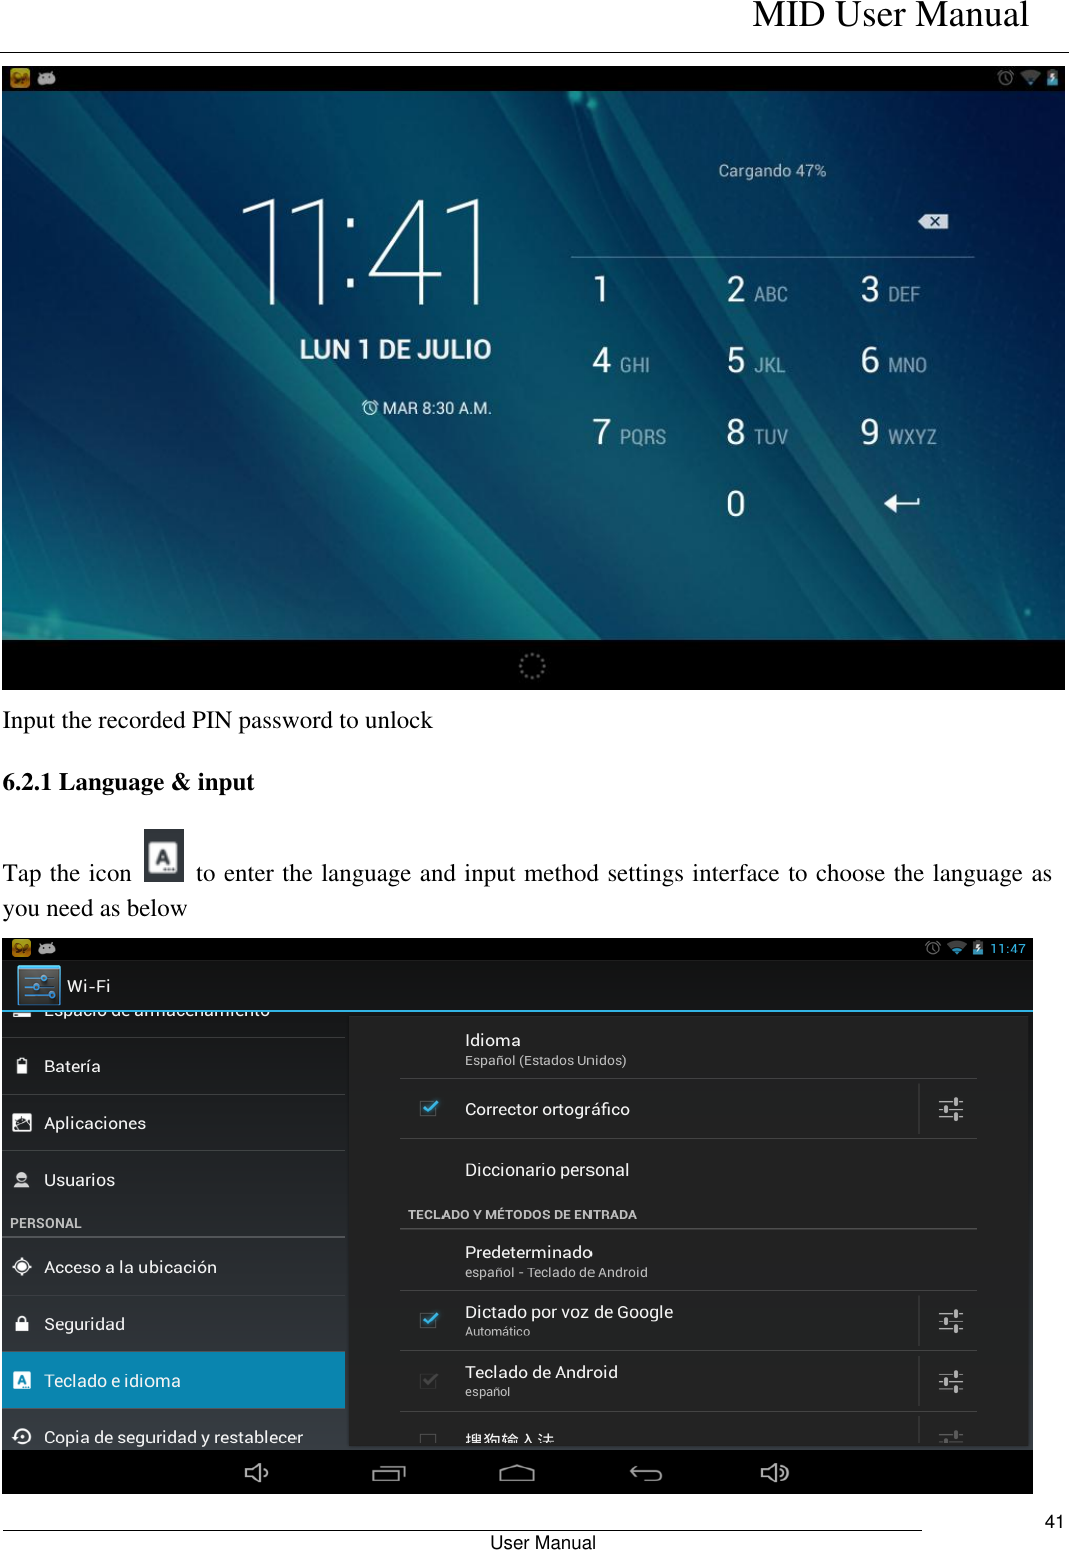    MID User Manual                                                        User Manual     41  Input the recorded PIN password to unlock 6.2.1 Language &amp; input Tap the icon    to enter the language and input method settings interface to choose the language as you need as below  